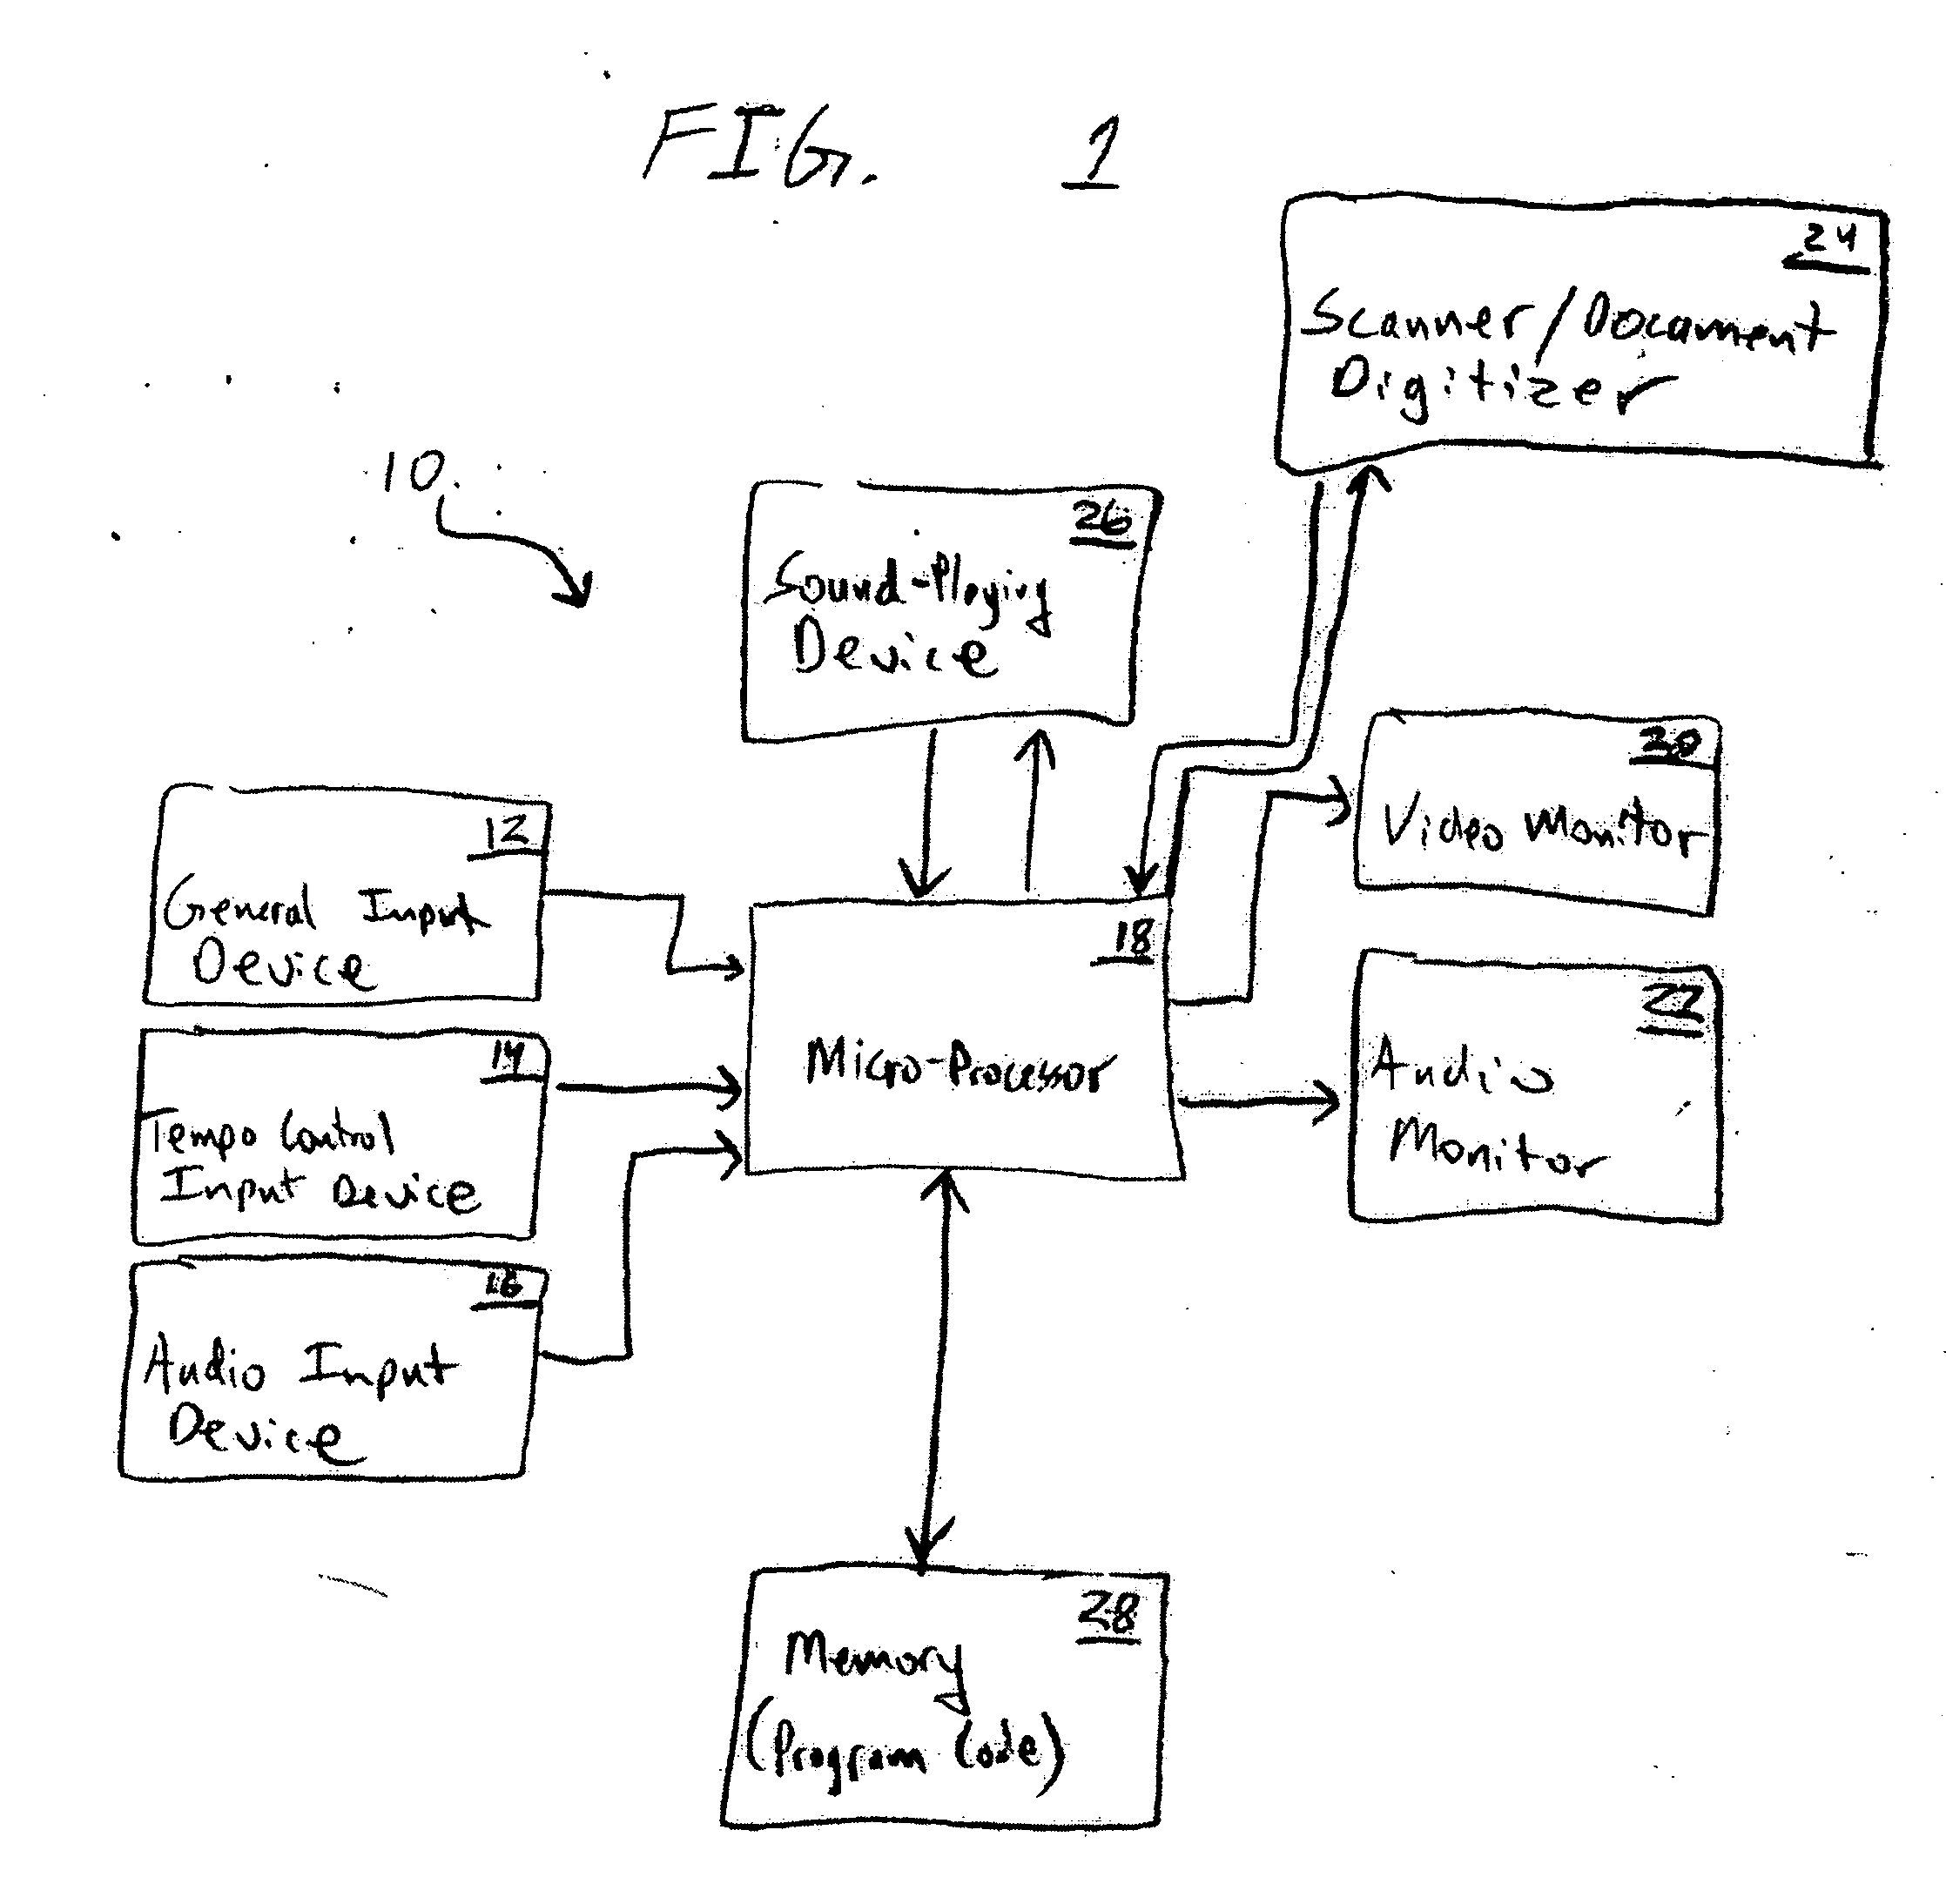 Method and apparatus for generating visual images based on musical compositions